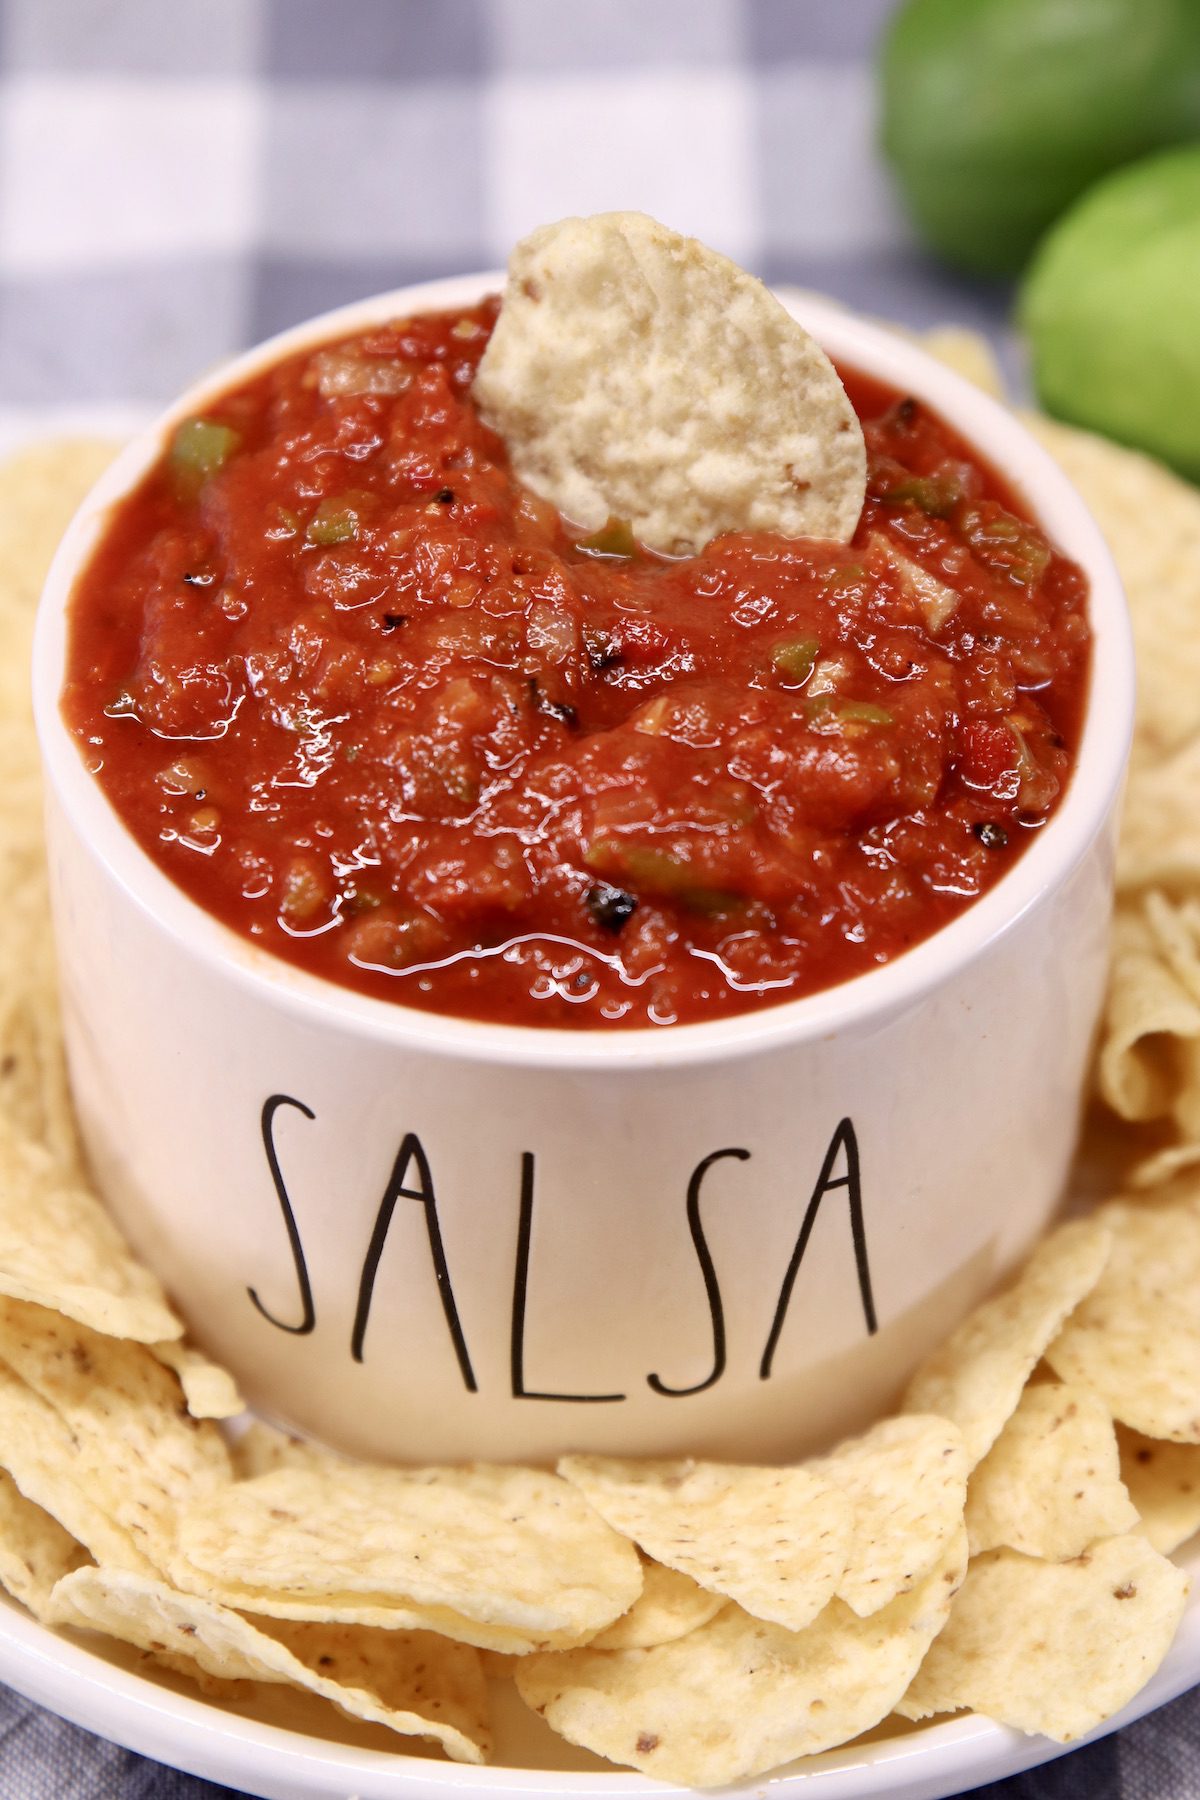 Chunky salsa in a bowl with tortilla chips